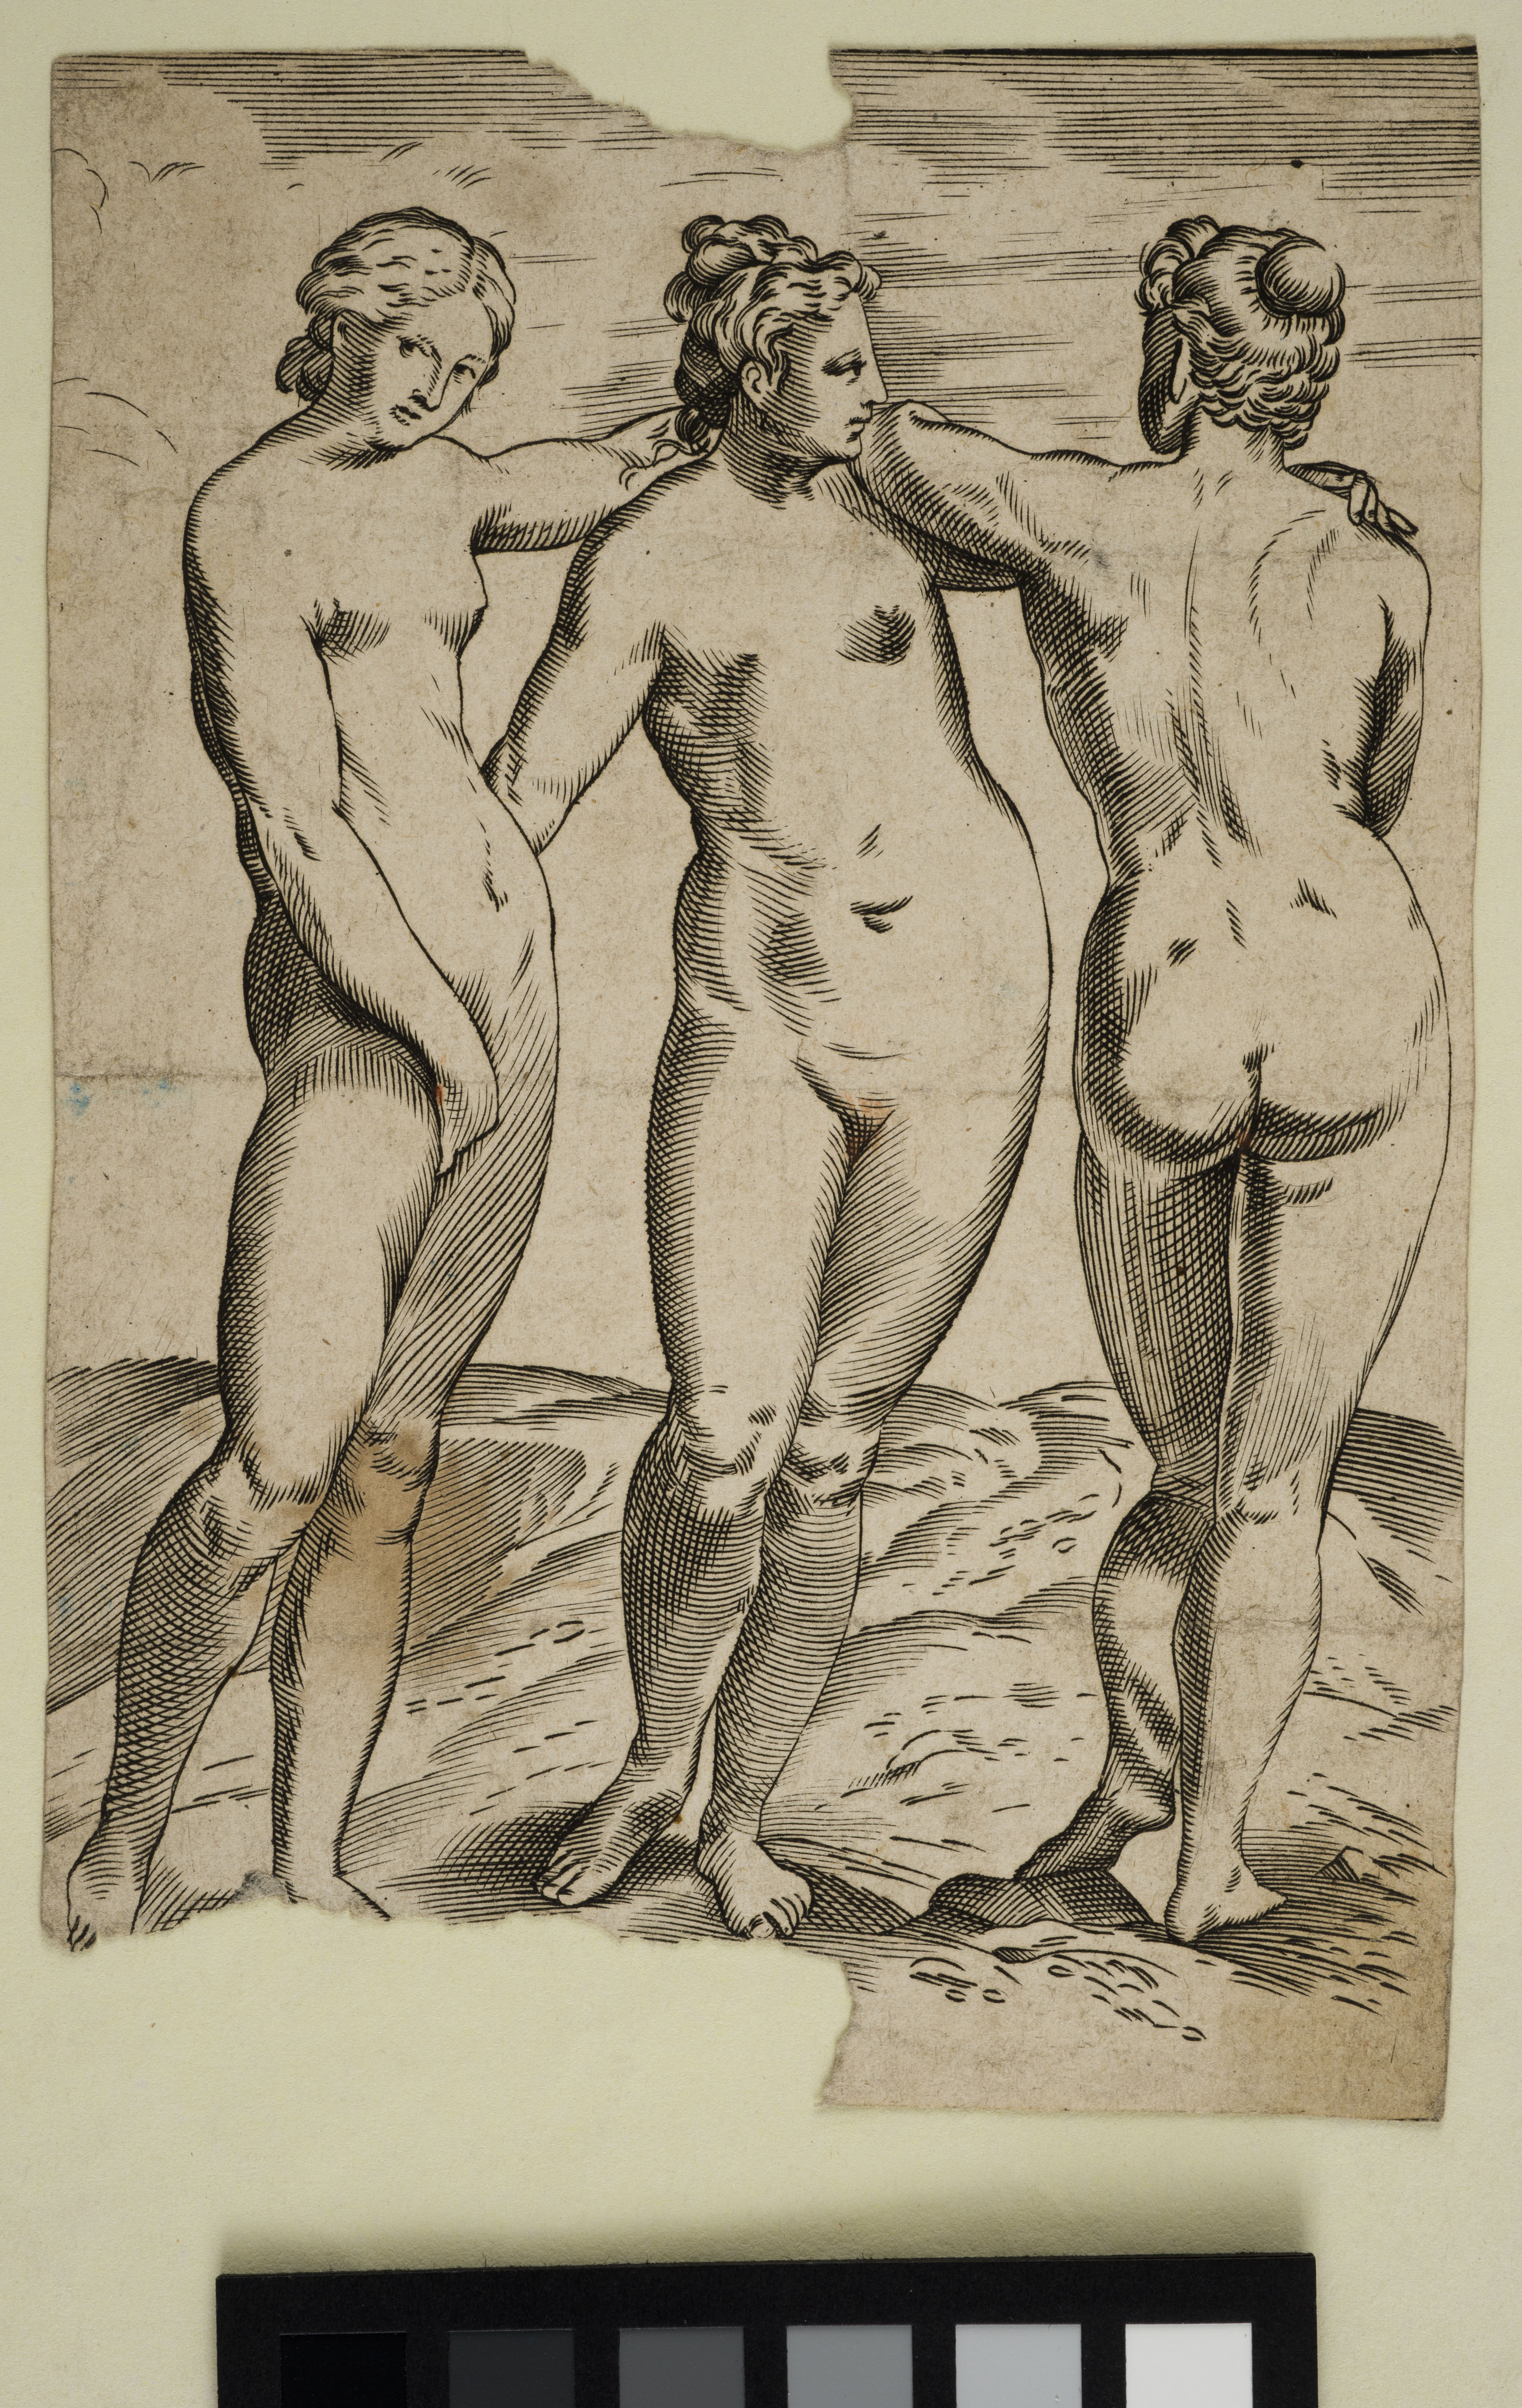 <p><strong>Unknown artist&nbsp;</strong><em>The Three Graces</em>, 17th century. Auckland Art Gallery Toi o Tāmaki, purchased 1955</p>
